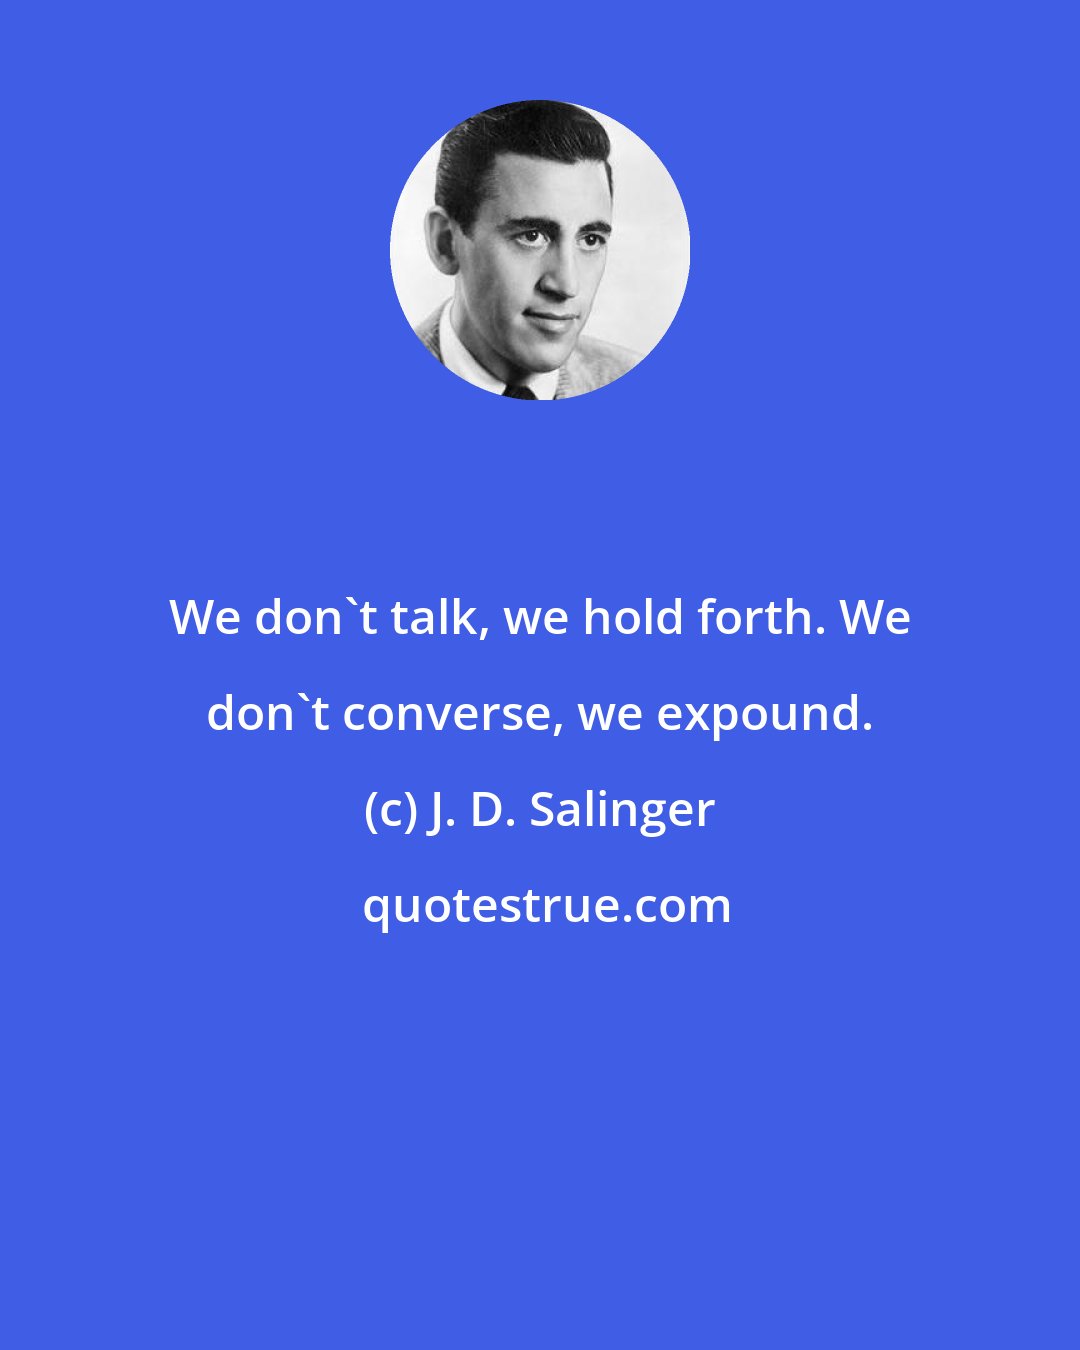 J. D. Salinger: We don't talk, we hold forth. We don't converse, we expound.